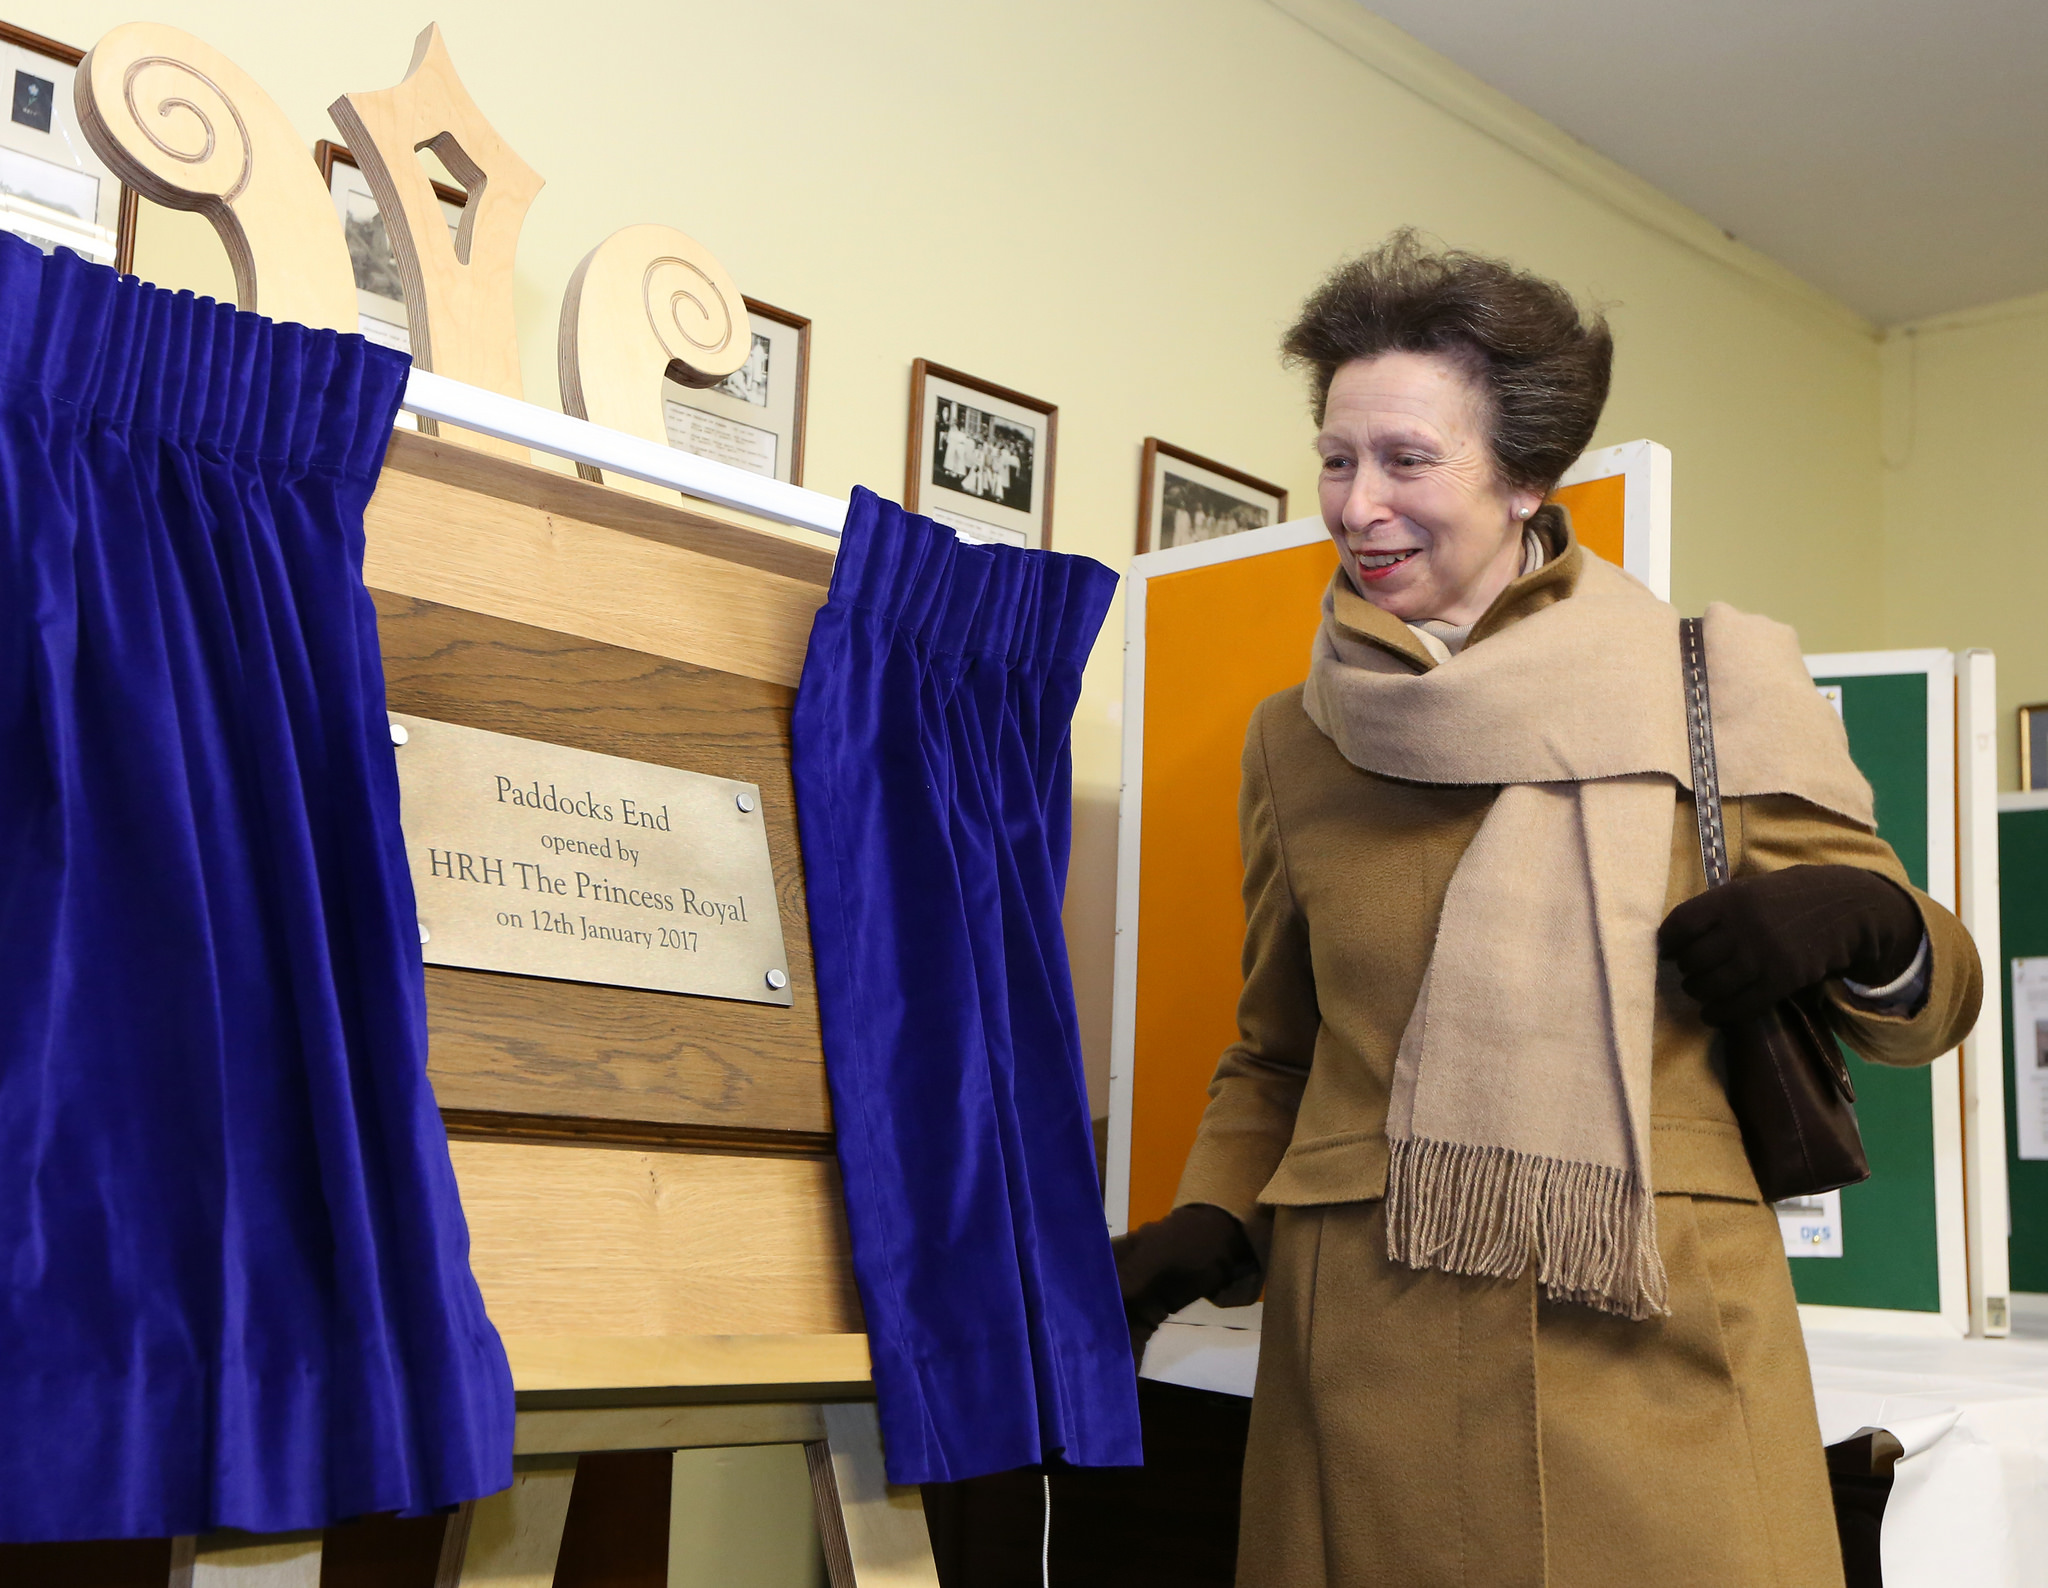 HRH The Princess Royal opening Paddocks End in Hutton Rudby